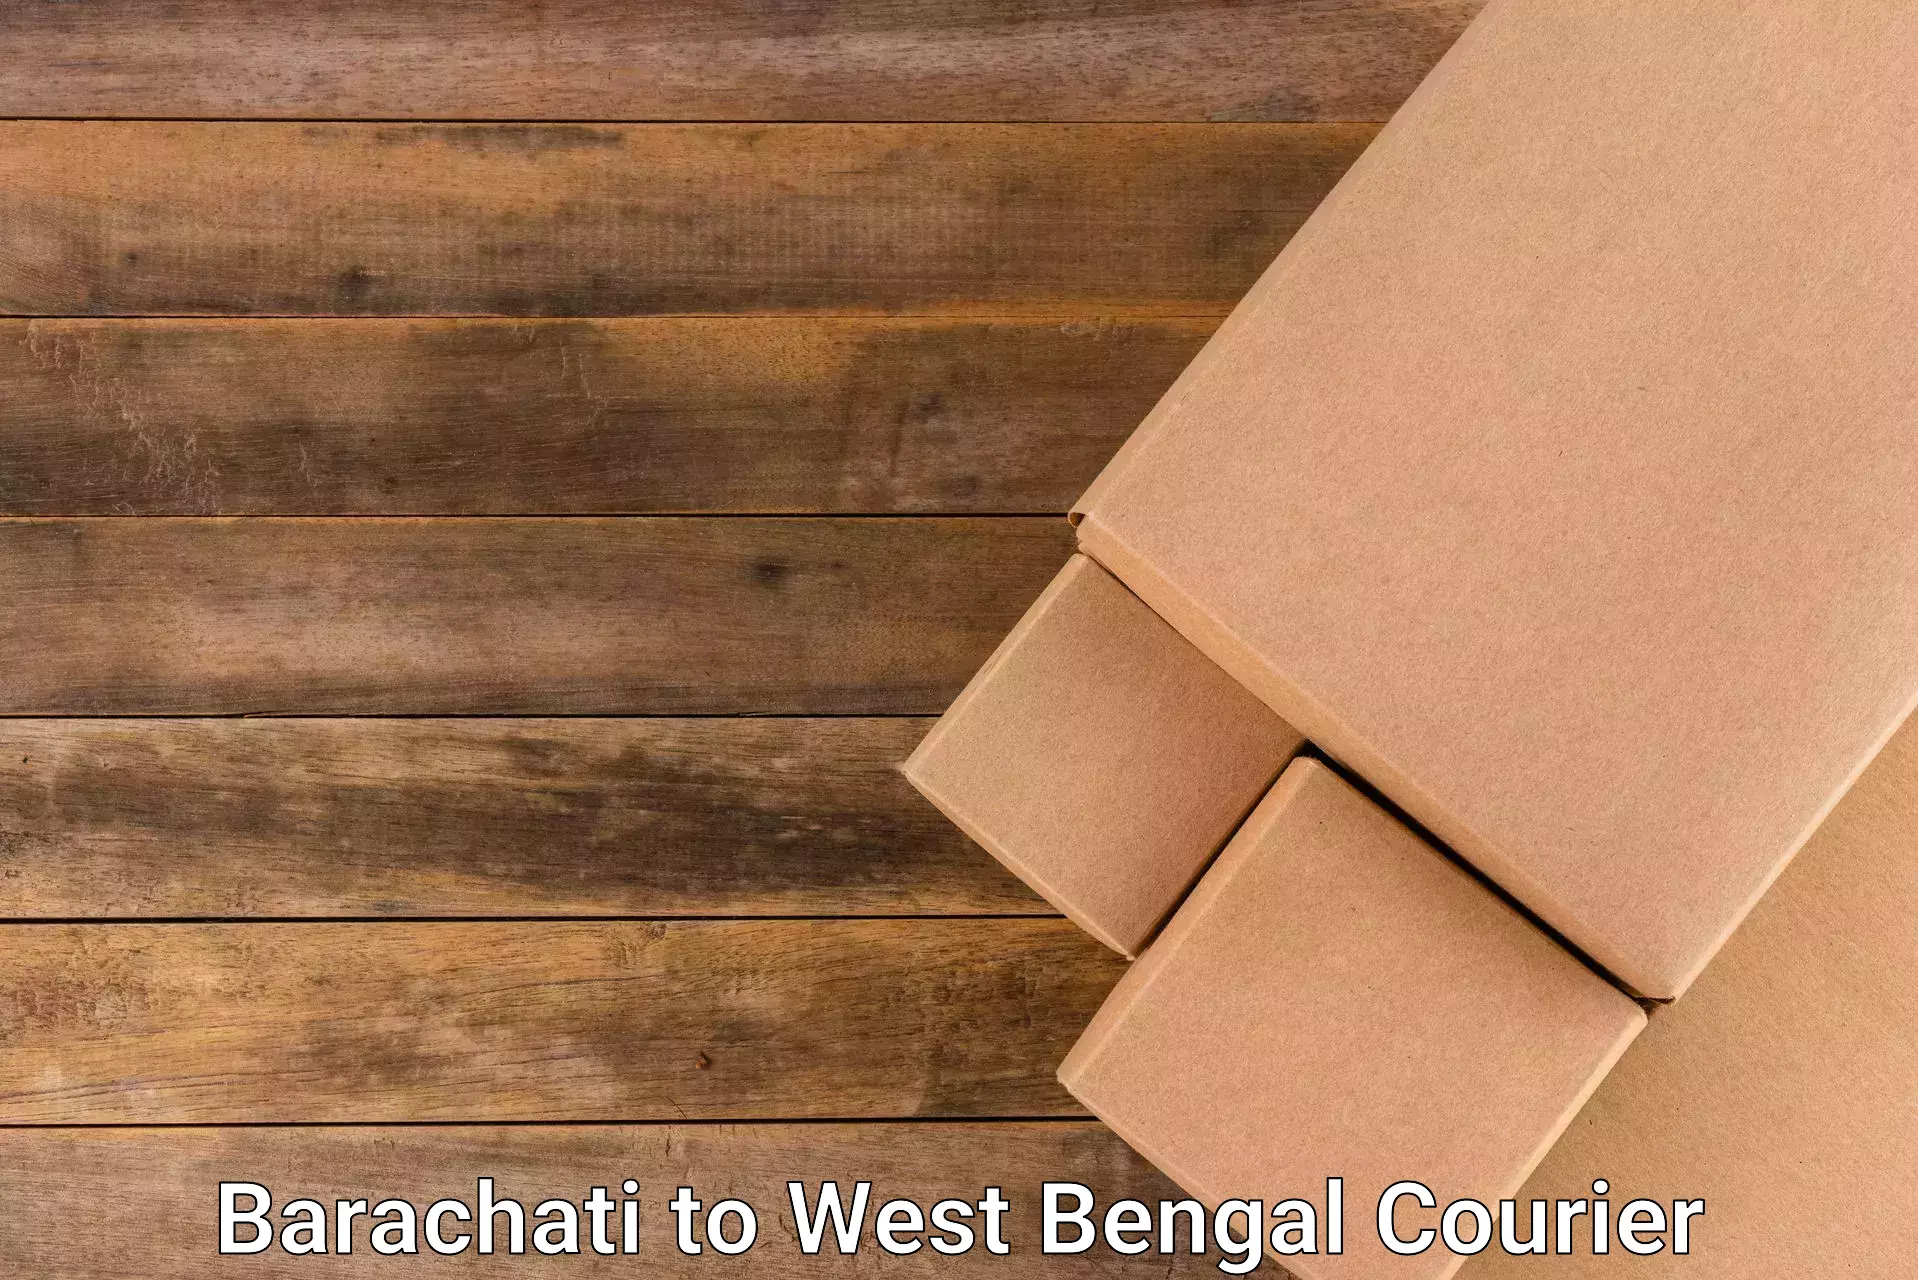 Full-service courier options in Barachati to Pandua